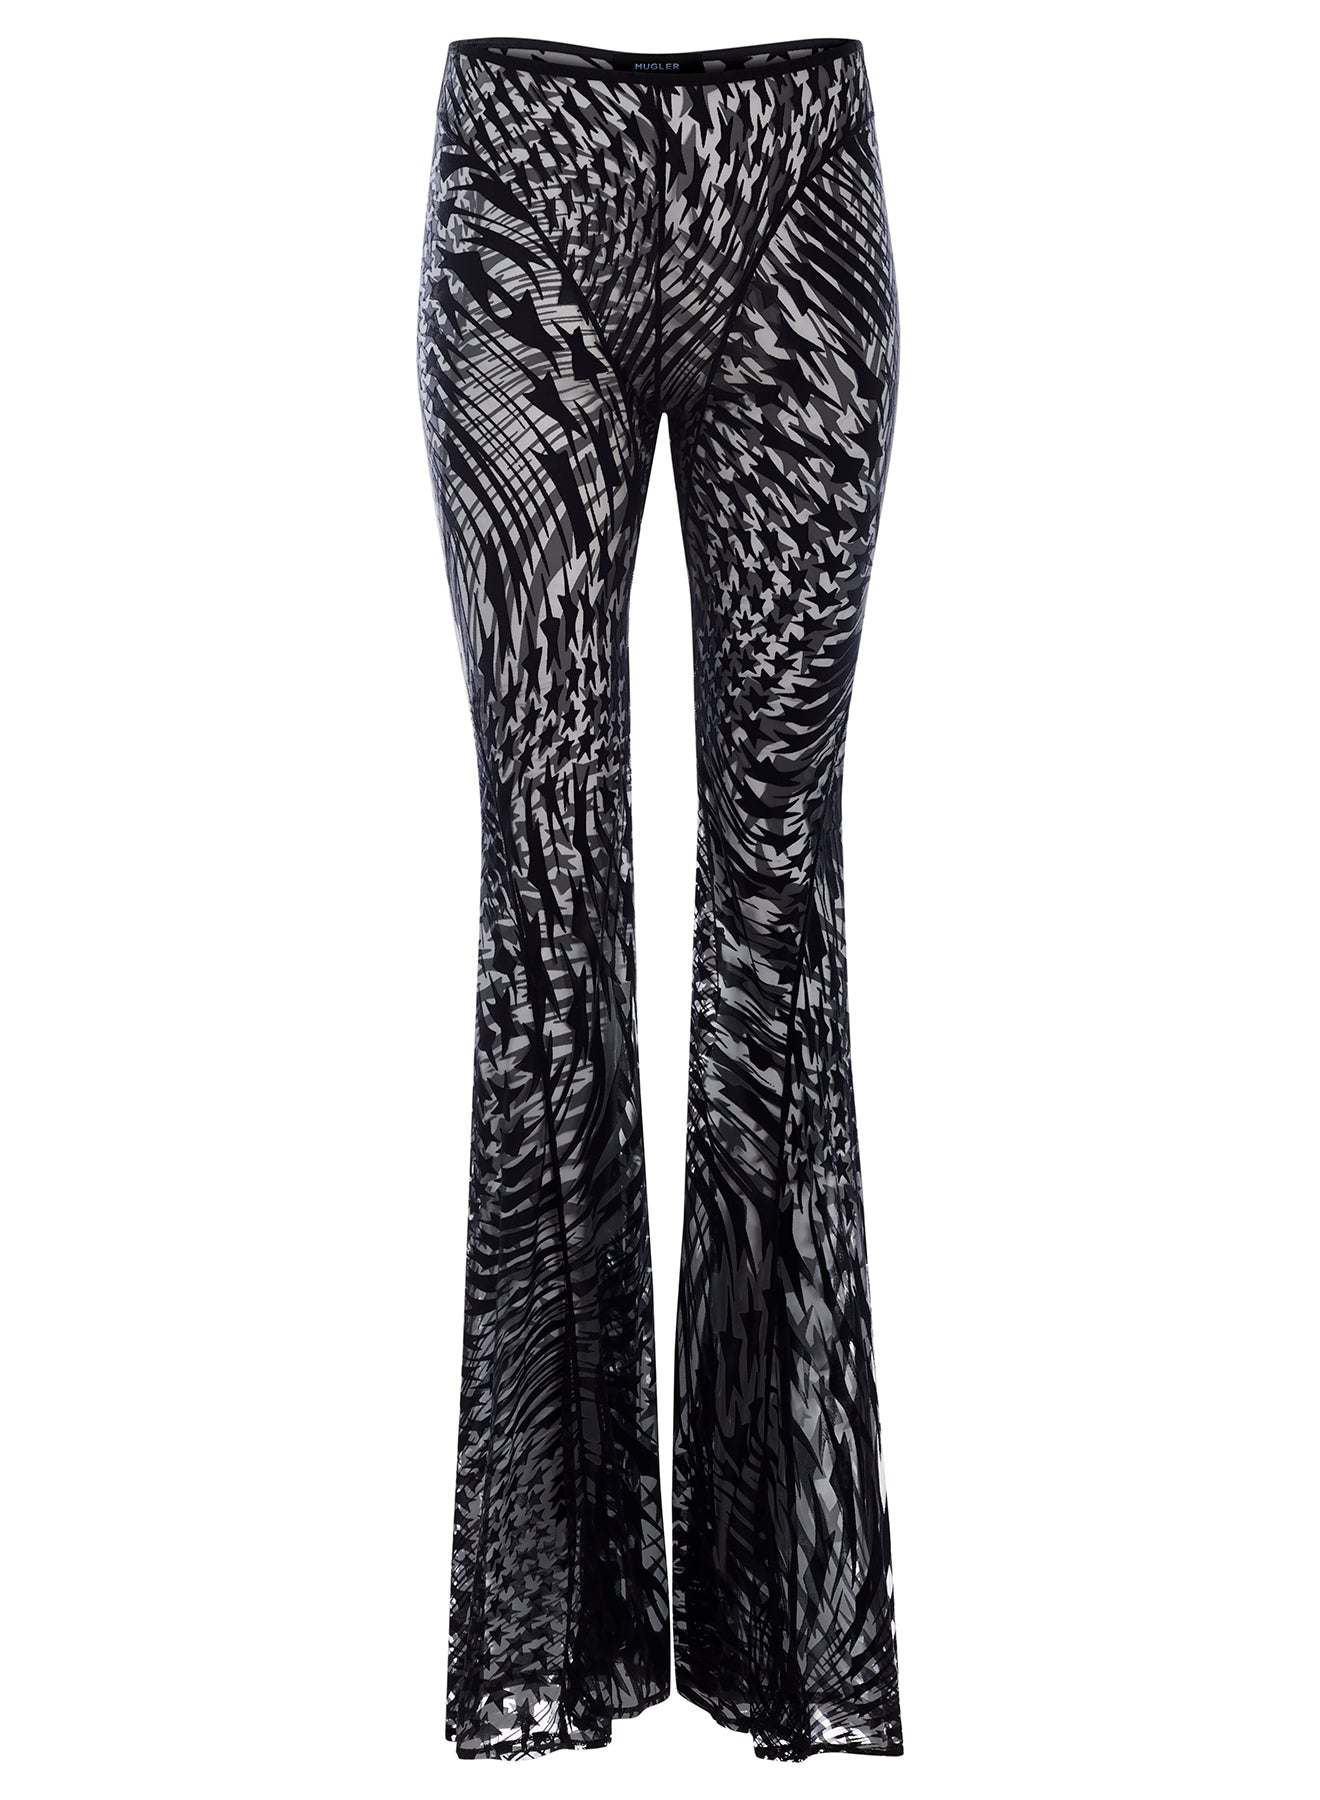 Buy Black & White Trousers & Pants for Women by INFLUENCE Online | Ajio.com